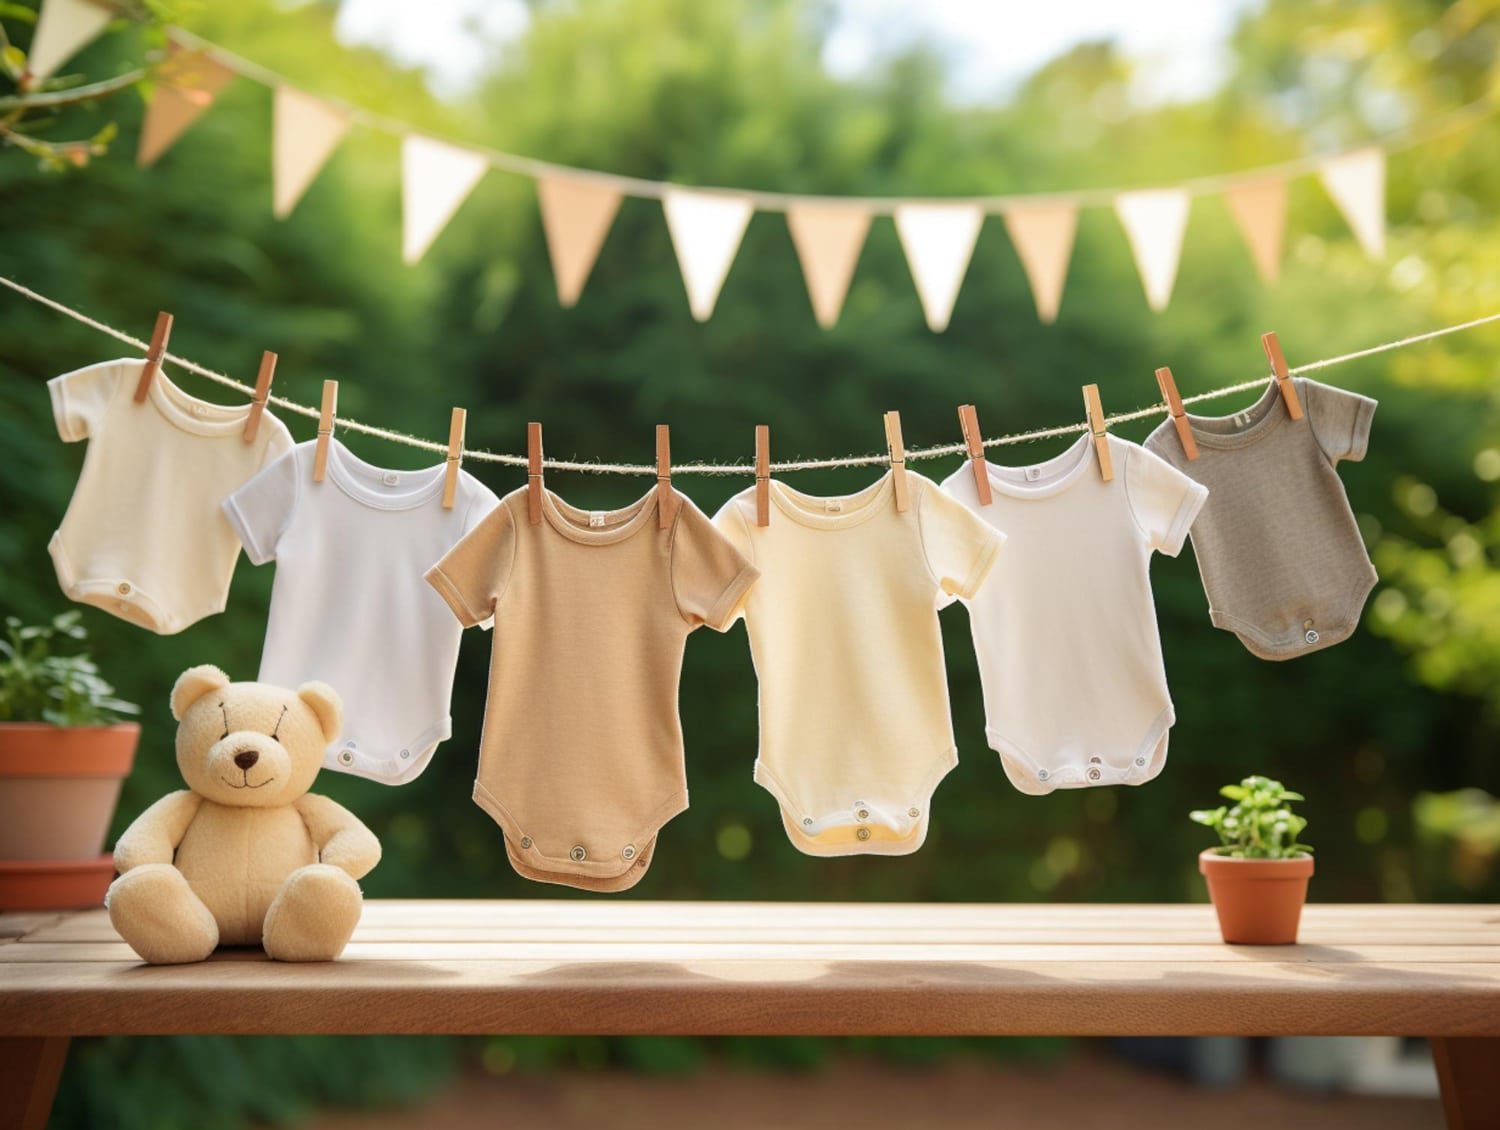 Baby Bunting Everything for Your Baby’s Needs